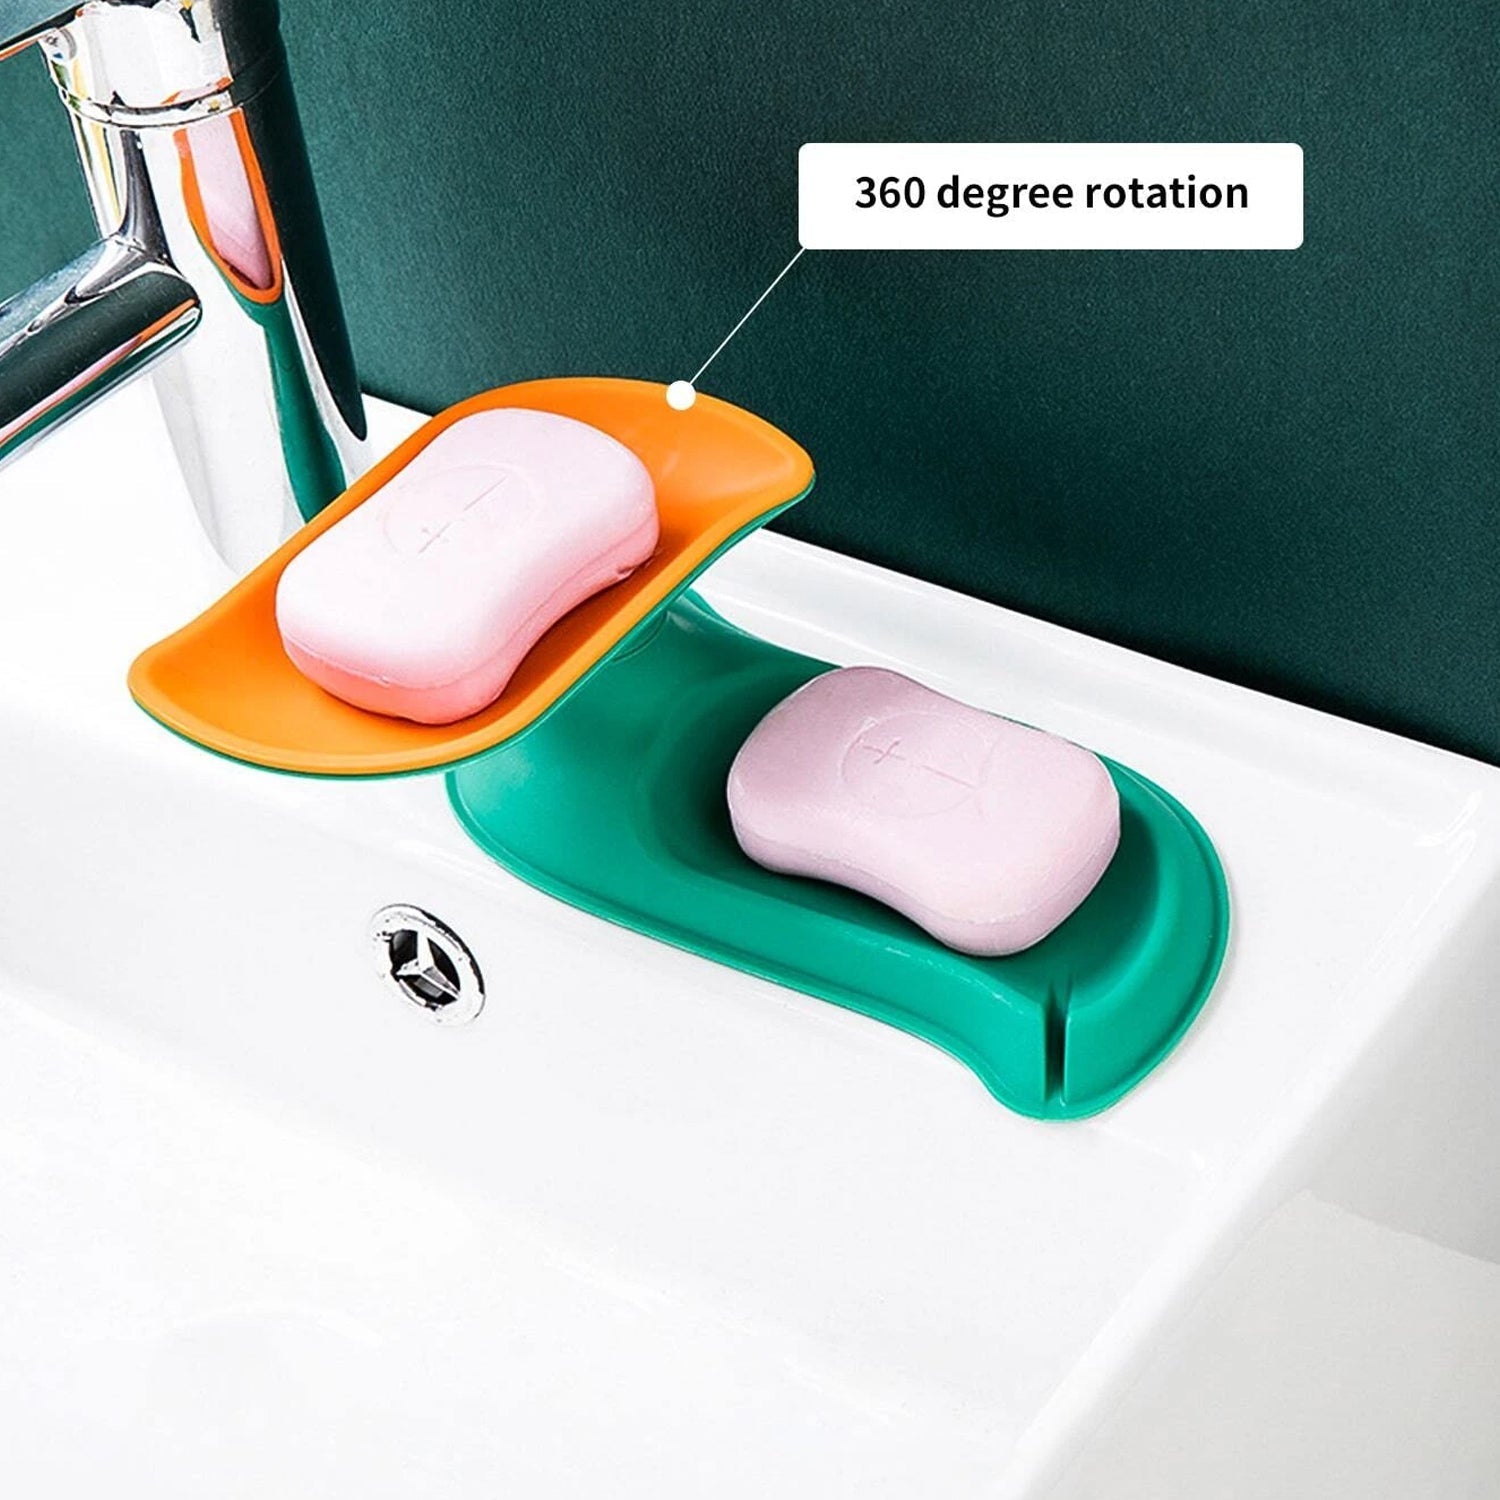 4860C Plastic Double Layer Soap Dish Holder| Decorative Storage Holder Box for Bathroom, Kitchen, Easy Cleaning , Soap Saver.